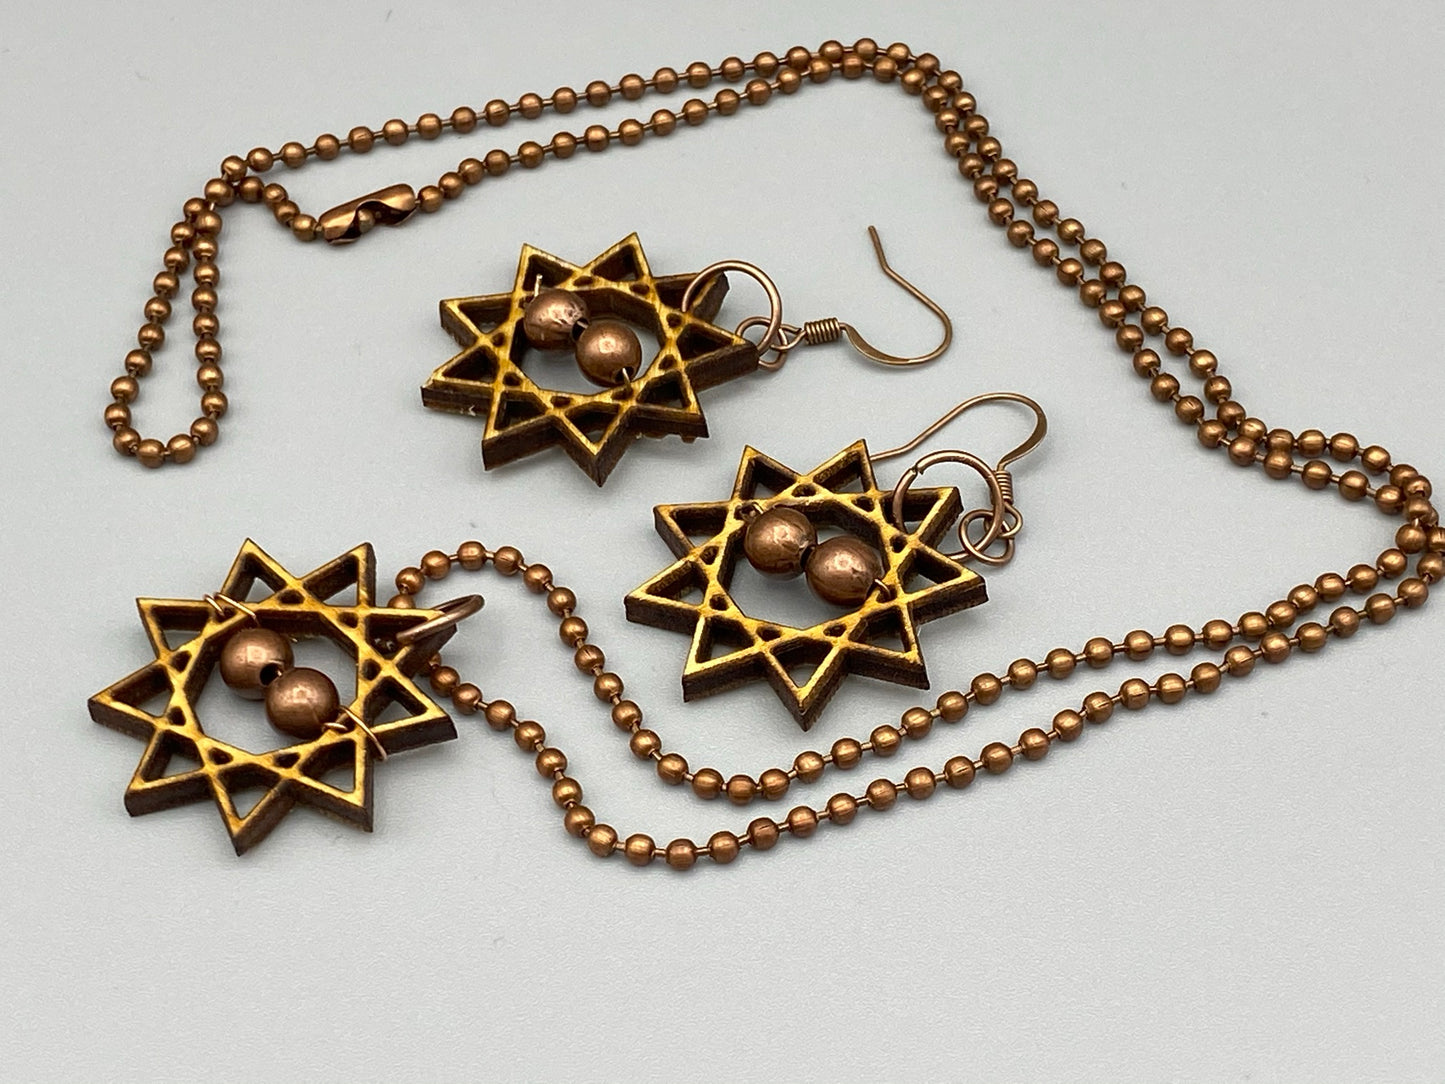 Nine Pointed Star Necklace And Earring Set With Copper Beads